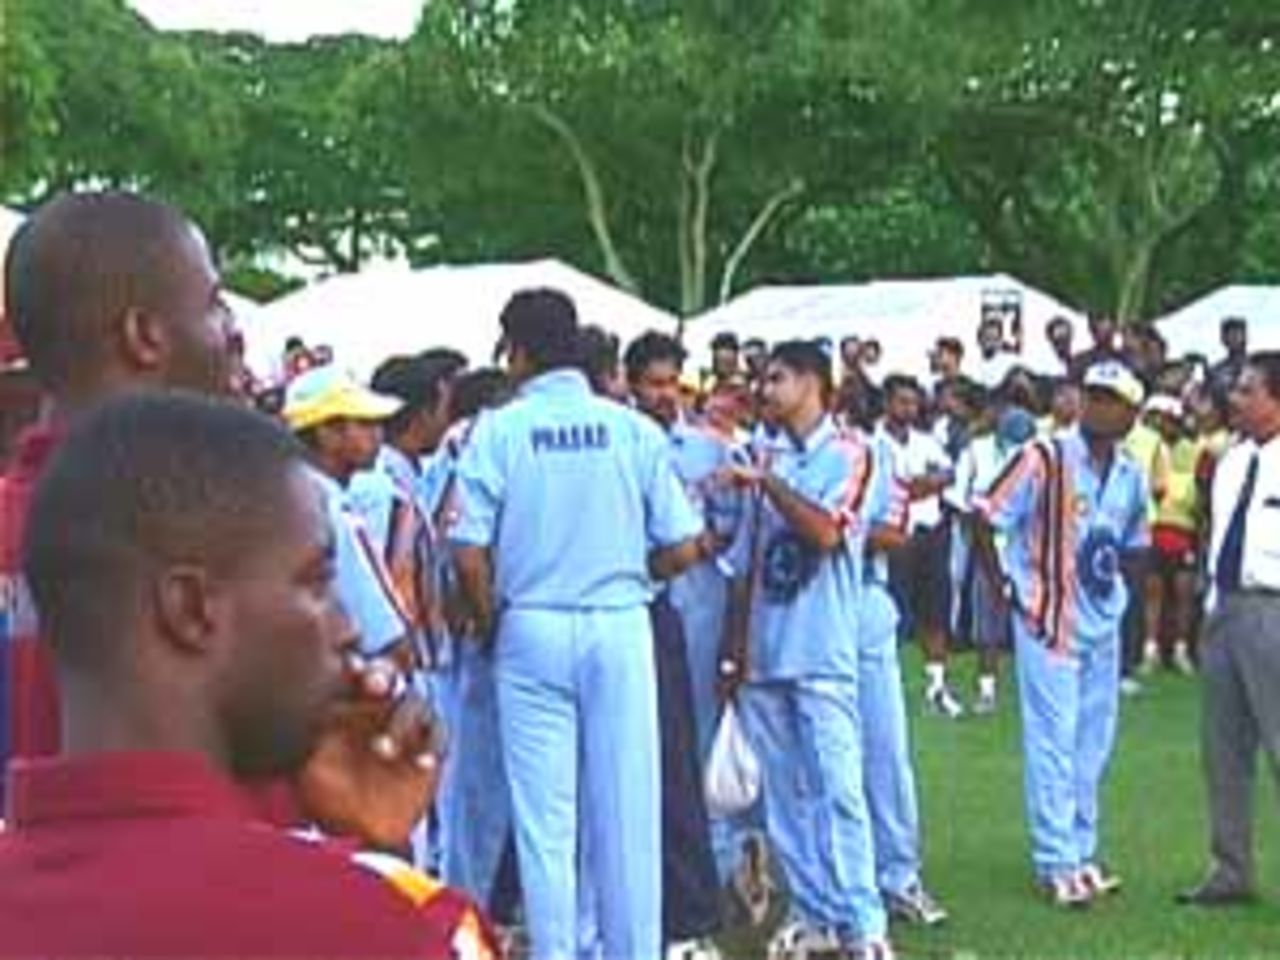 The Indians in discussion at the award ceremony, India v West Indies (3rd ODI), Coca-Cola Singapore Challenge, 1999-2000, Kallang Ground, Singapore, 5 Sep 1999.